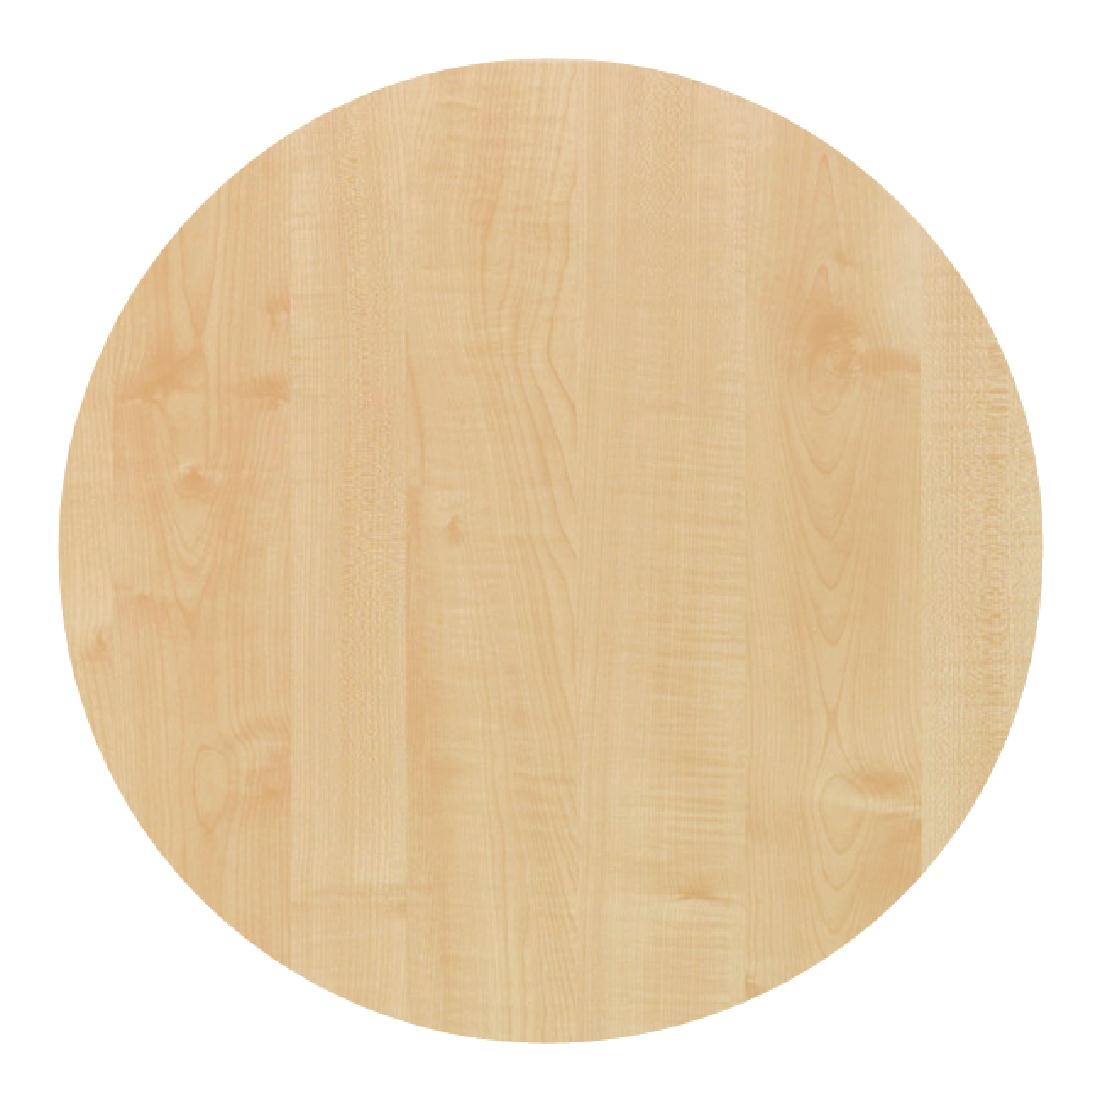 Werzalit Pre-drilled Round Table Top  Maple 800mm